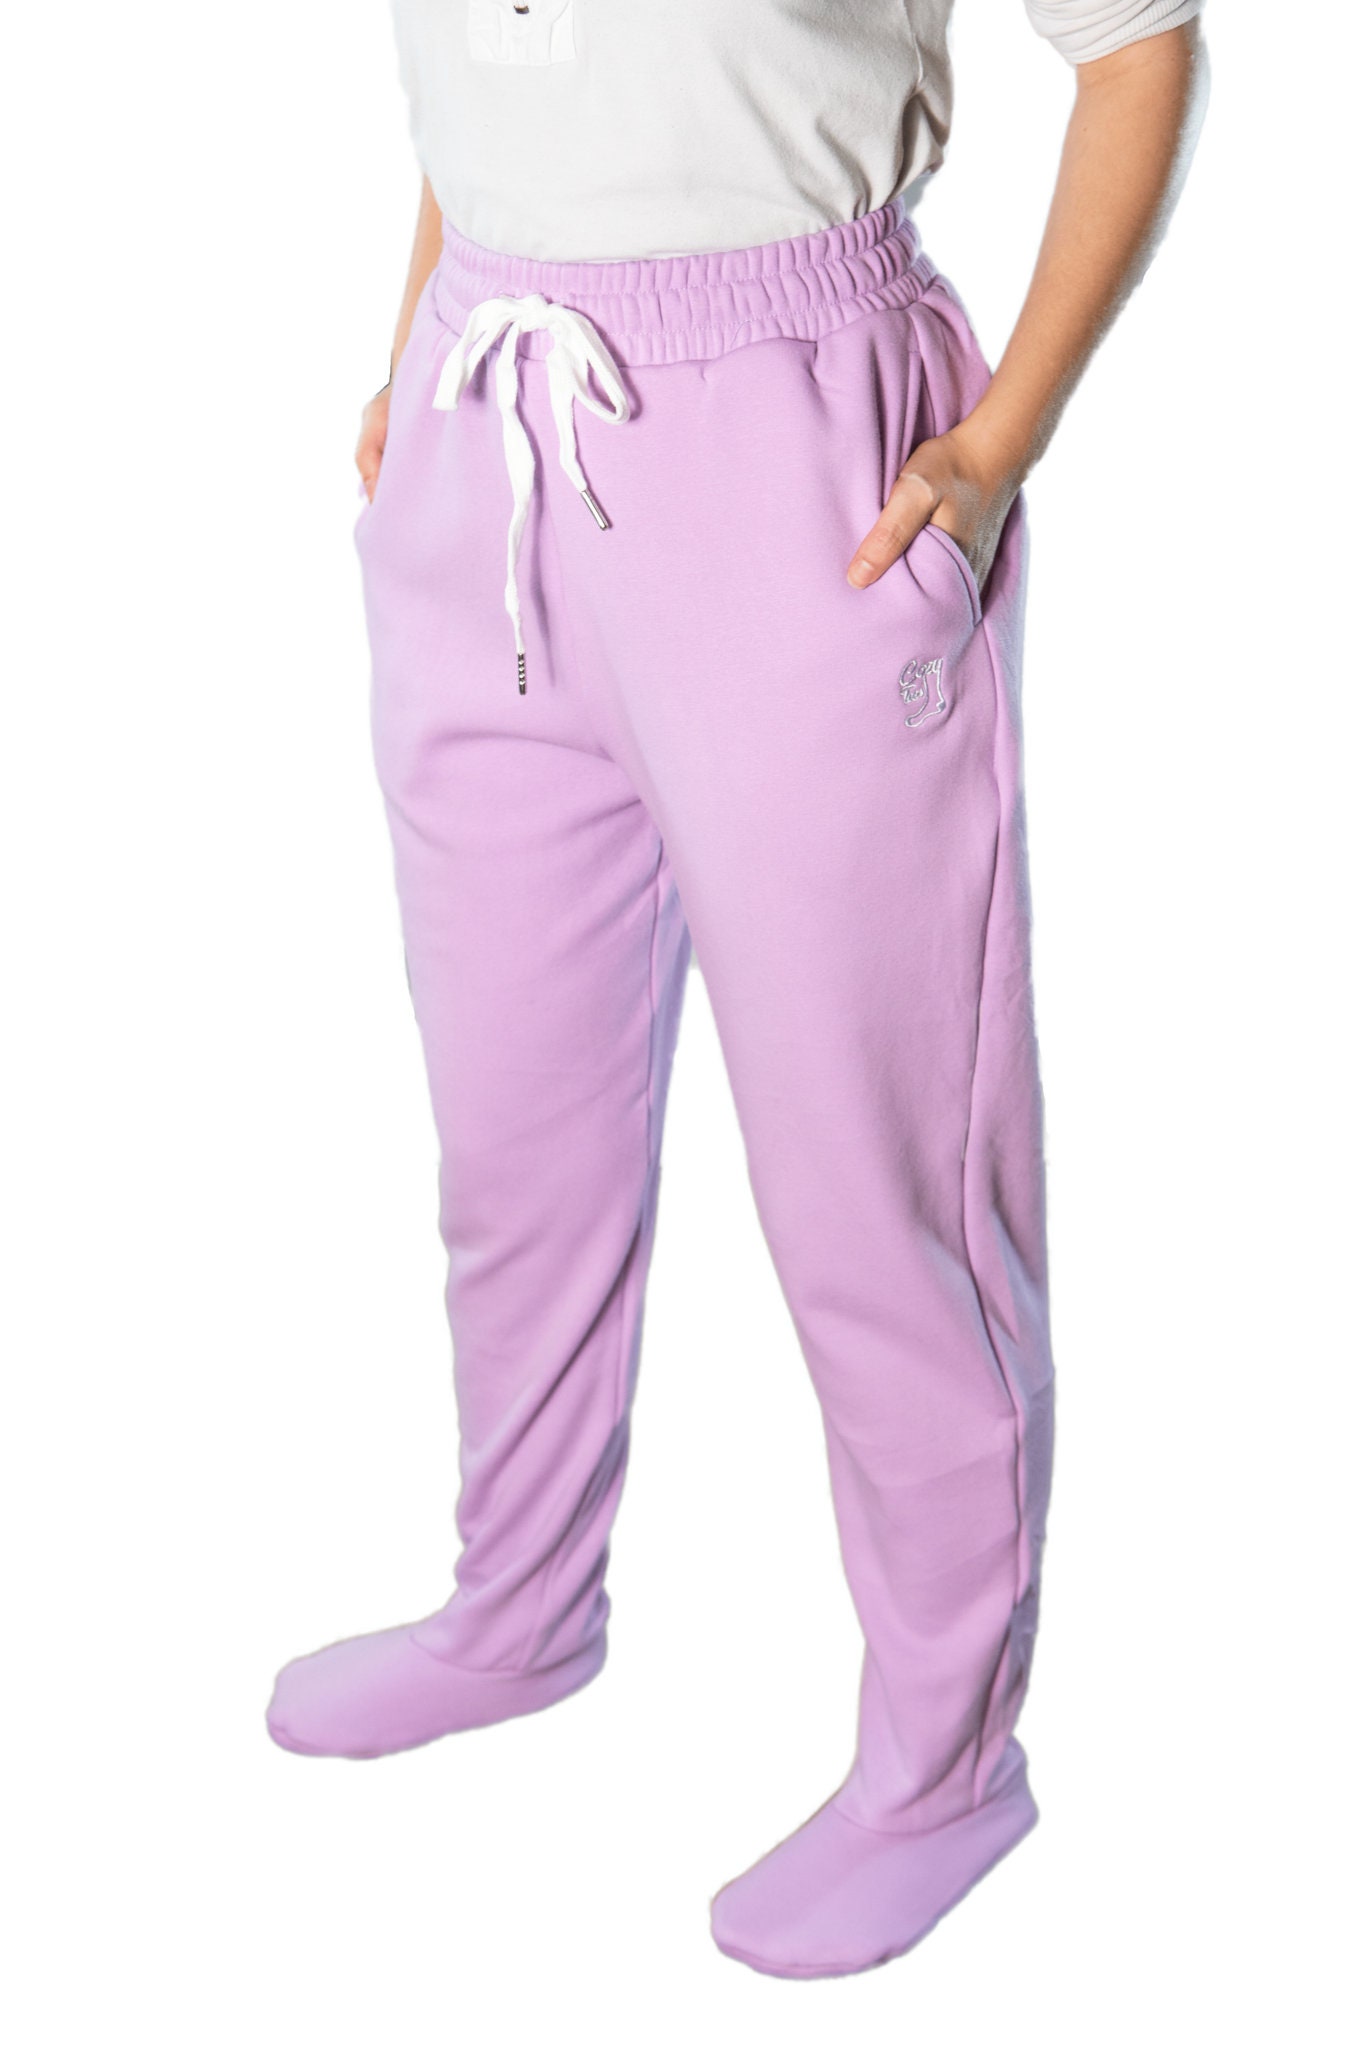 Cozy Toes Footed Sweatpants, Feet Lined With Premium Sherpa Fleece